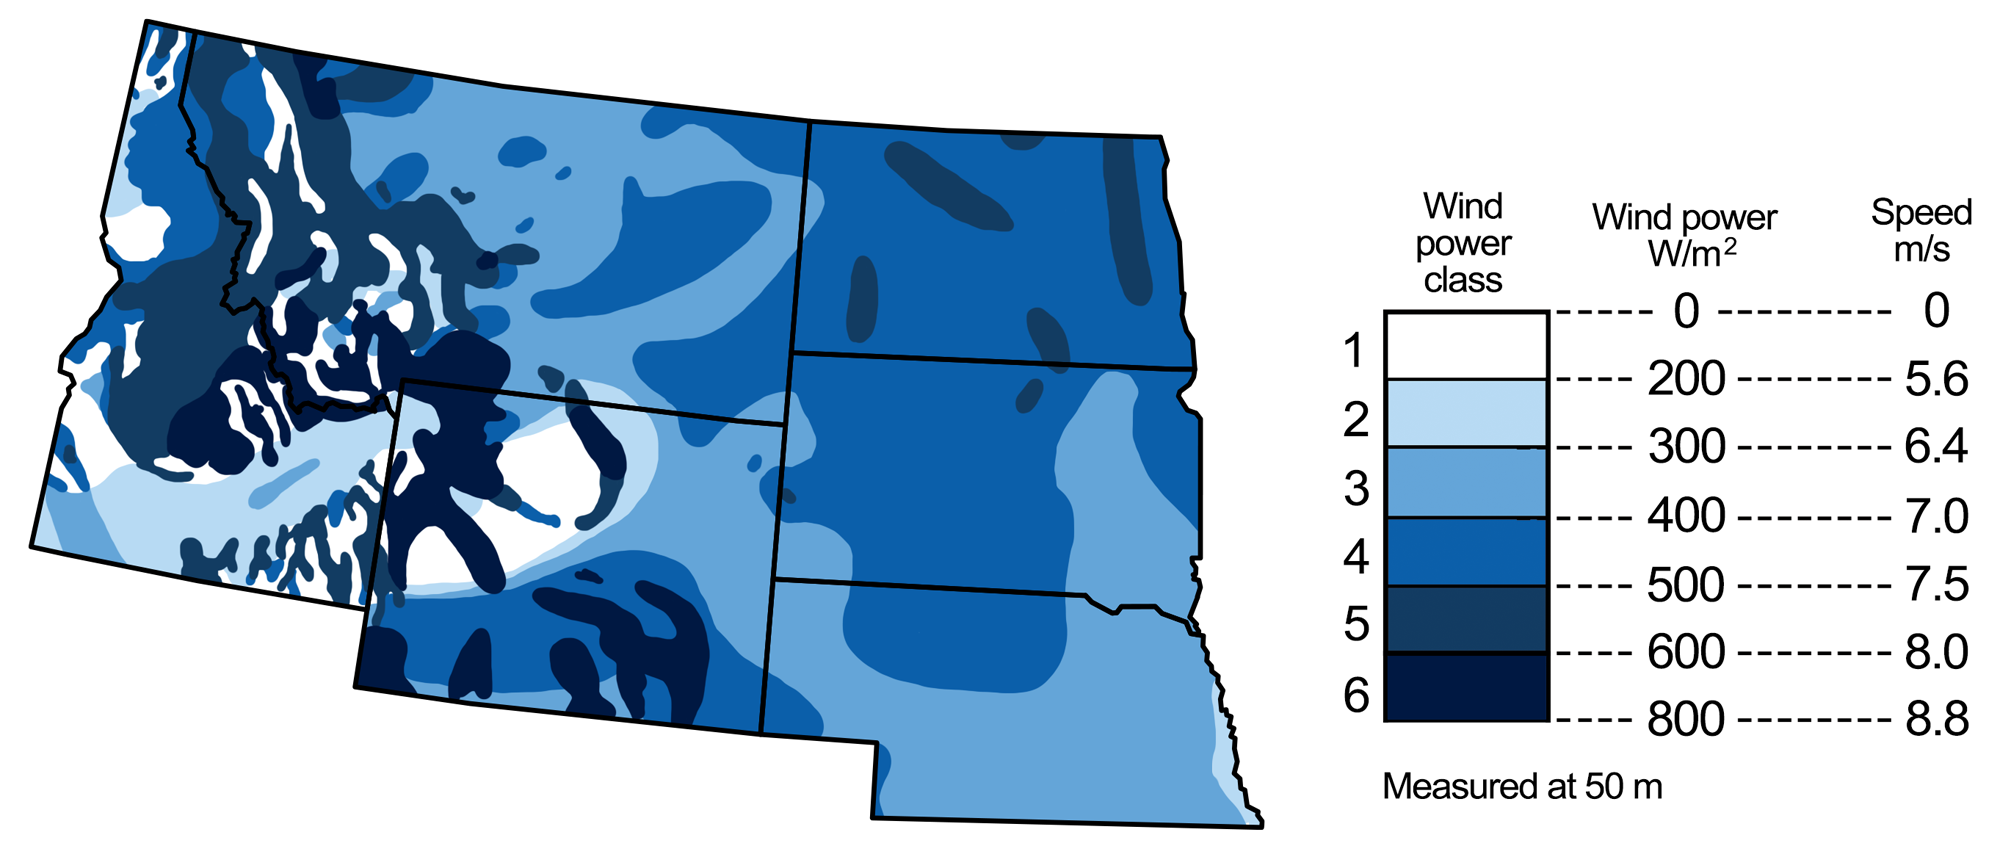 Map of the northwest-central region with state boundaries outlined in black and wind energy potential indicated by shades of blue, with white to light blue areas having the lowest potential and dark blue areas having the highest potential. The Great Plains and Central Lowland regions generally have medium to high potential. The highest-potential areas are in parts of the Rocky Mountains, although the mountains also have regions of no potential.